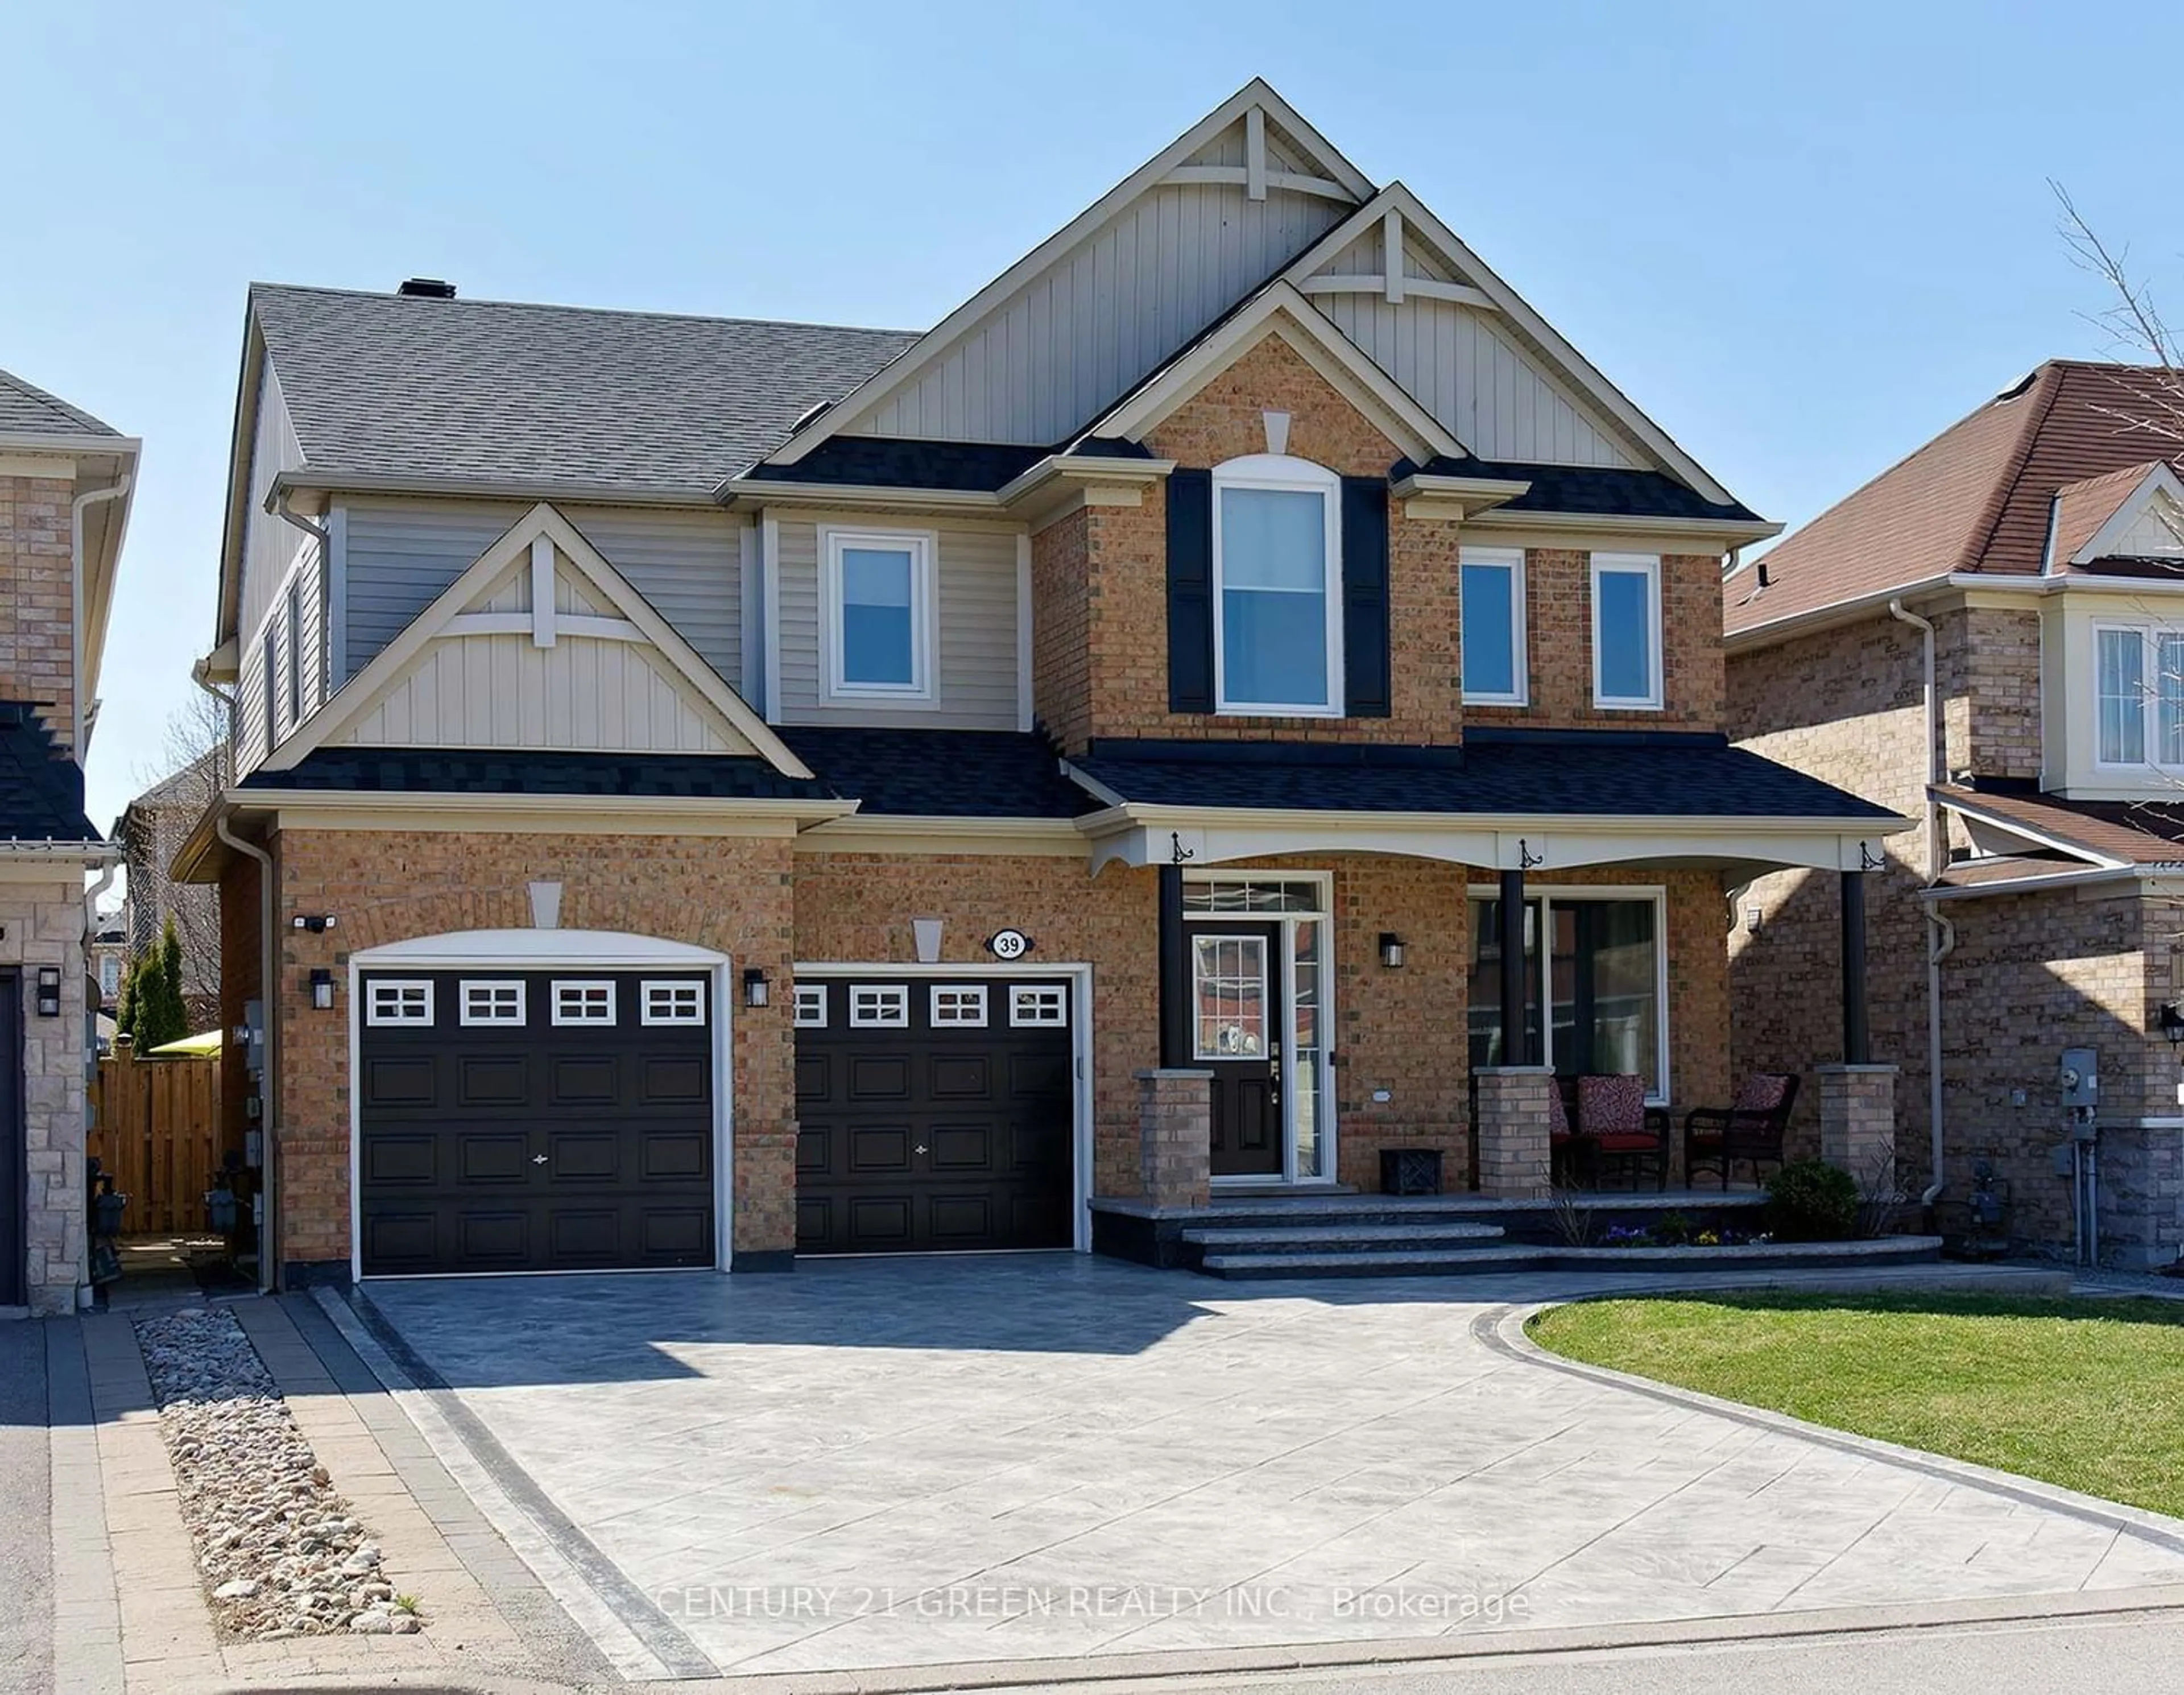 Home with brick exterior material for 39 Clamerten Rd, Whitchurch-Stouffville Ontario L4A 0E8